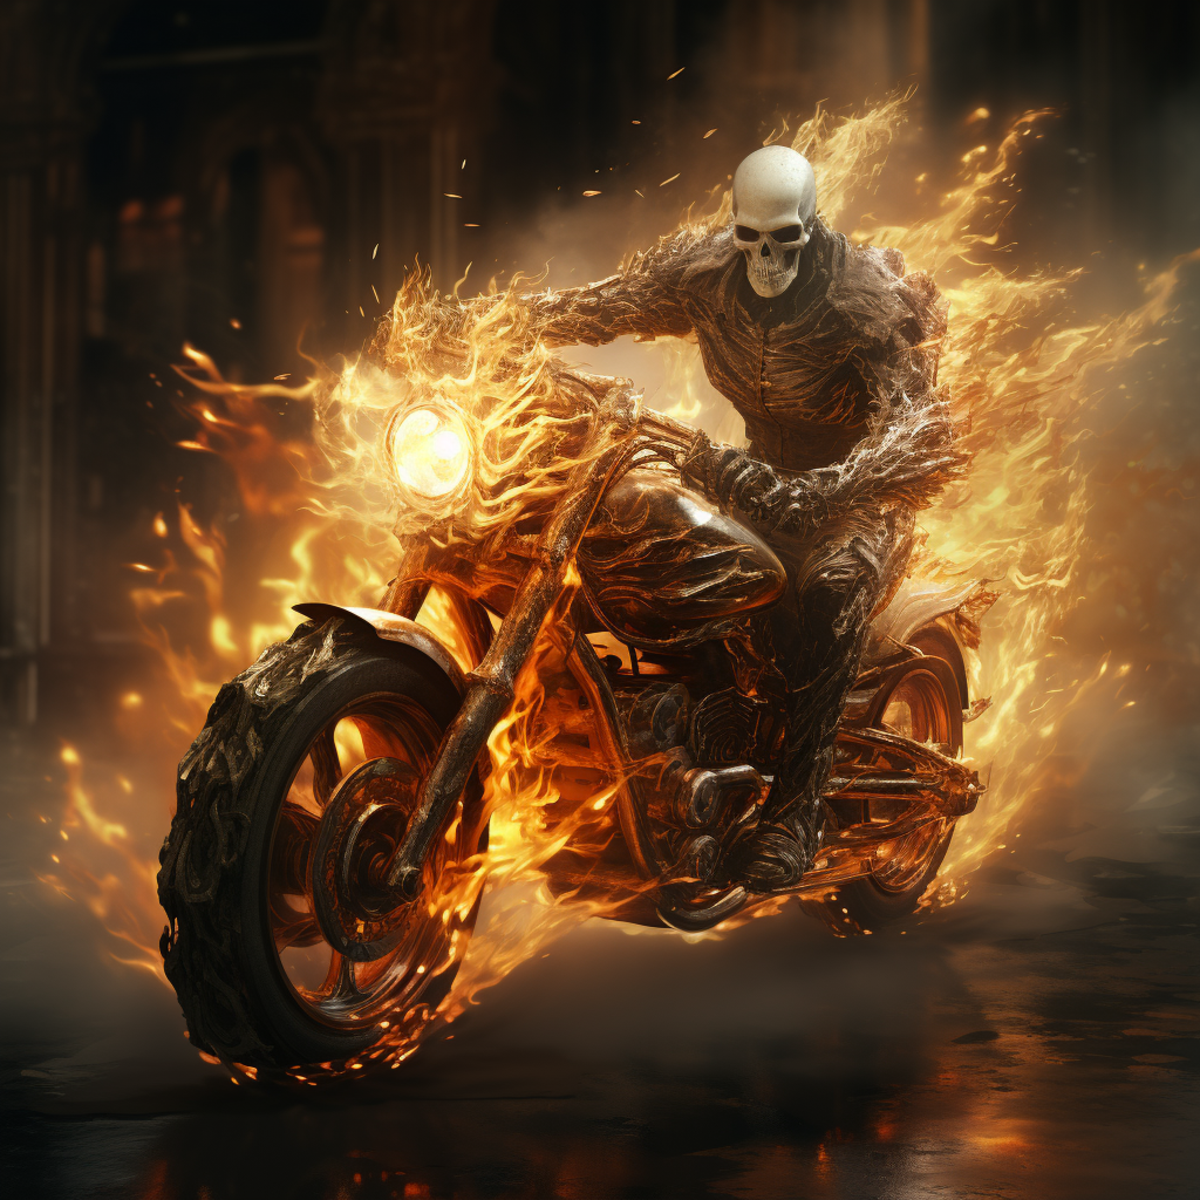 10 Striking Ghost Rider Photos That Will Leave You In Awe